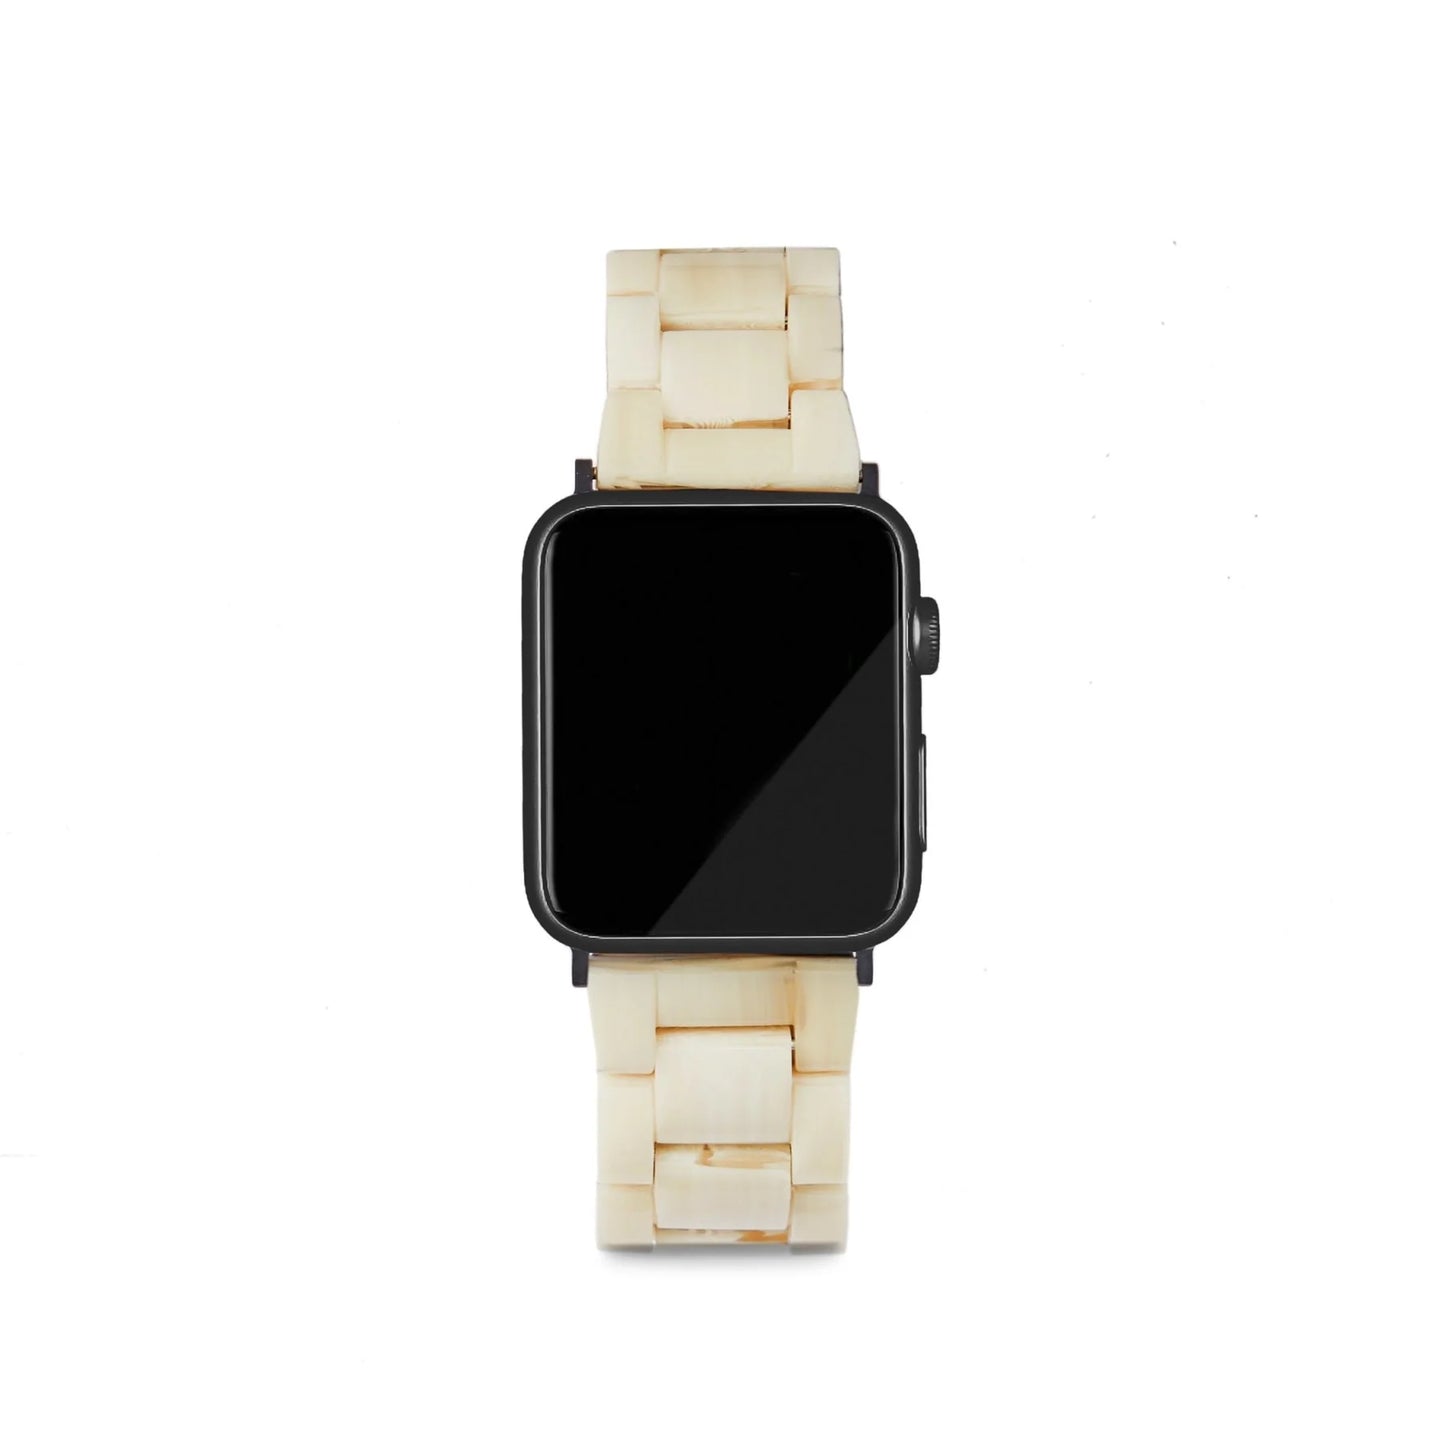 Apple Watch Band in Alabaster